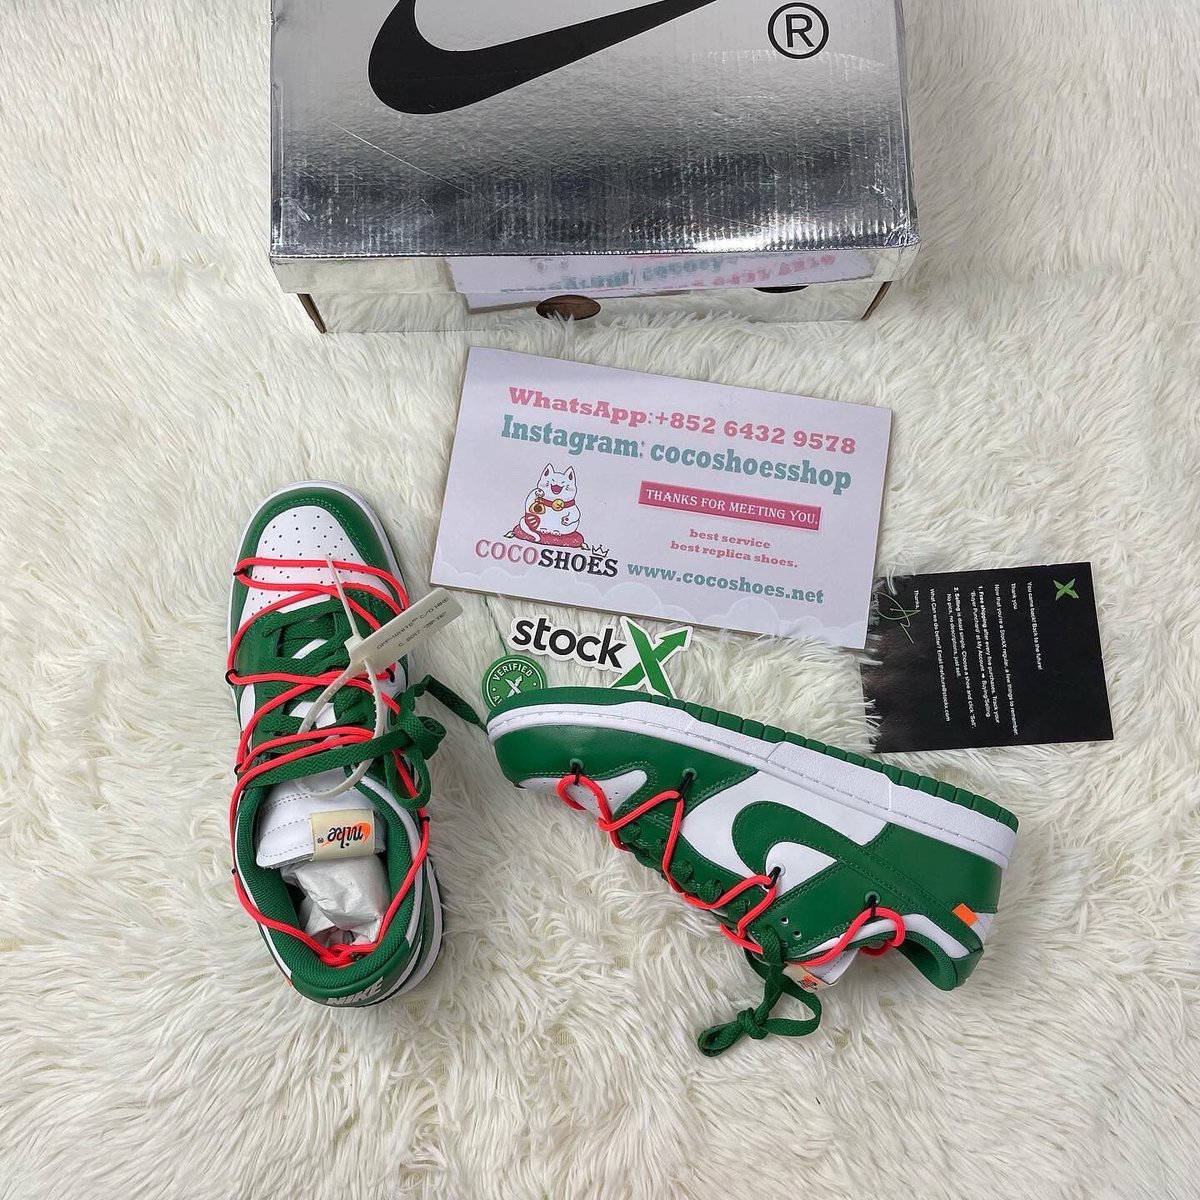 Buy Coco Sneakers Best Nike Dunk Low Off-White Pine Green #dunkoffwhite #offwhitedunk #offwhitenike #pinegreen #dunkgreen #dunklow #dunklows #offwhitedunkpine #dunklowoffwhite #dunk #dunks #lowdunk #cocoshoes #cocoshoesnet #cocoshoesjing #cocosneakers #coco #shoes #dunkshoes😙